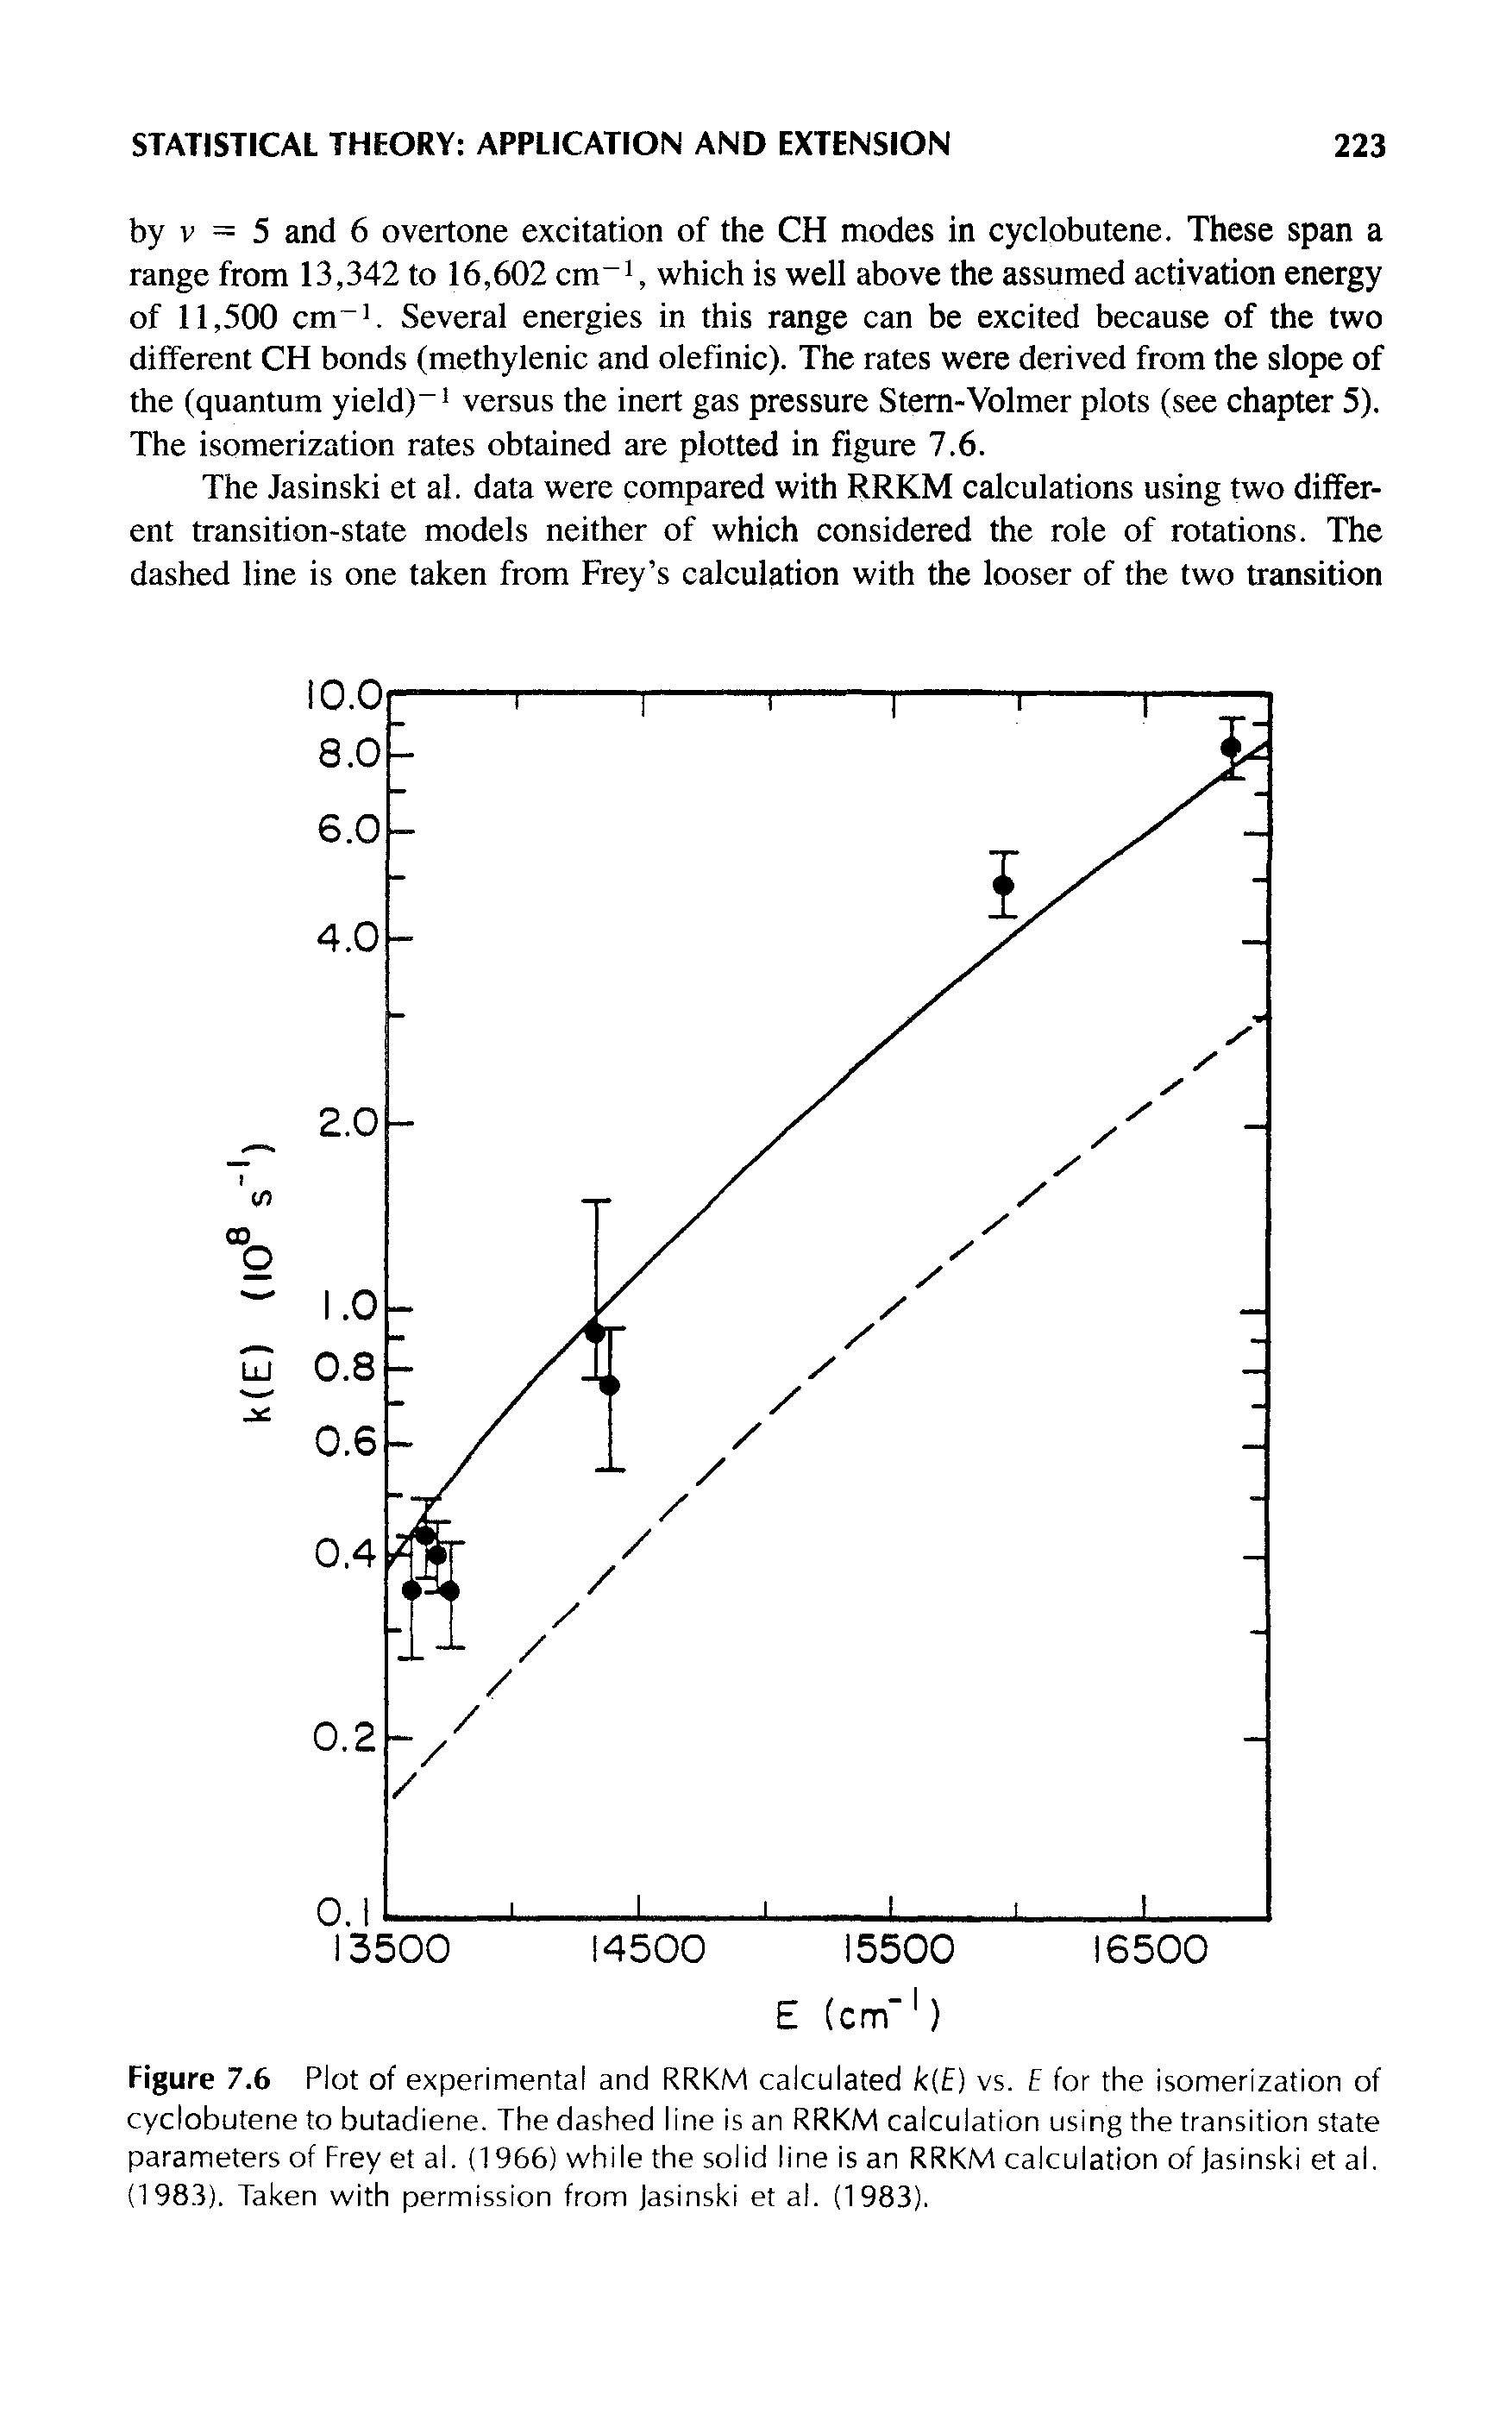 Figure 7.6 Plot of experimental and RRKM calculated k(E) vs. E for the isomerization of cyclobutene to butadiene. The dashed line is an RRKM calculation using the transition state parameters of Frey et al. (1966) while the solid line is an RRKM calculation of Jasinski et al, (1983). Taken with permission from jasinski et al. (1983).